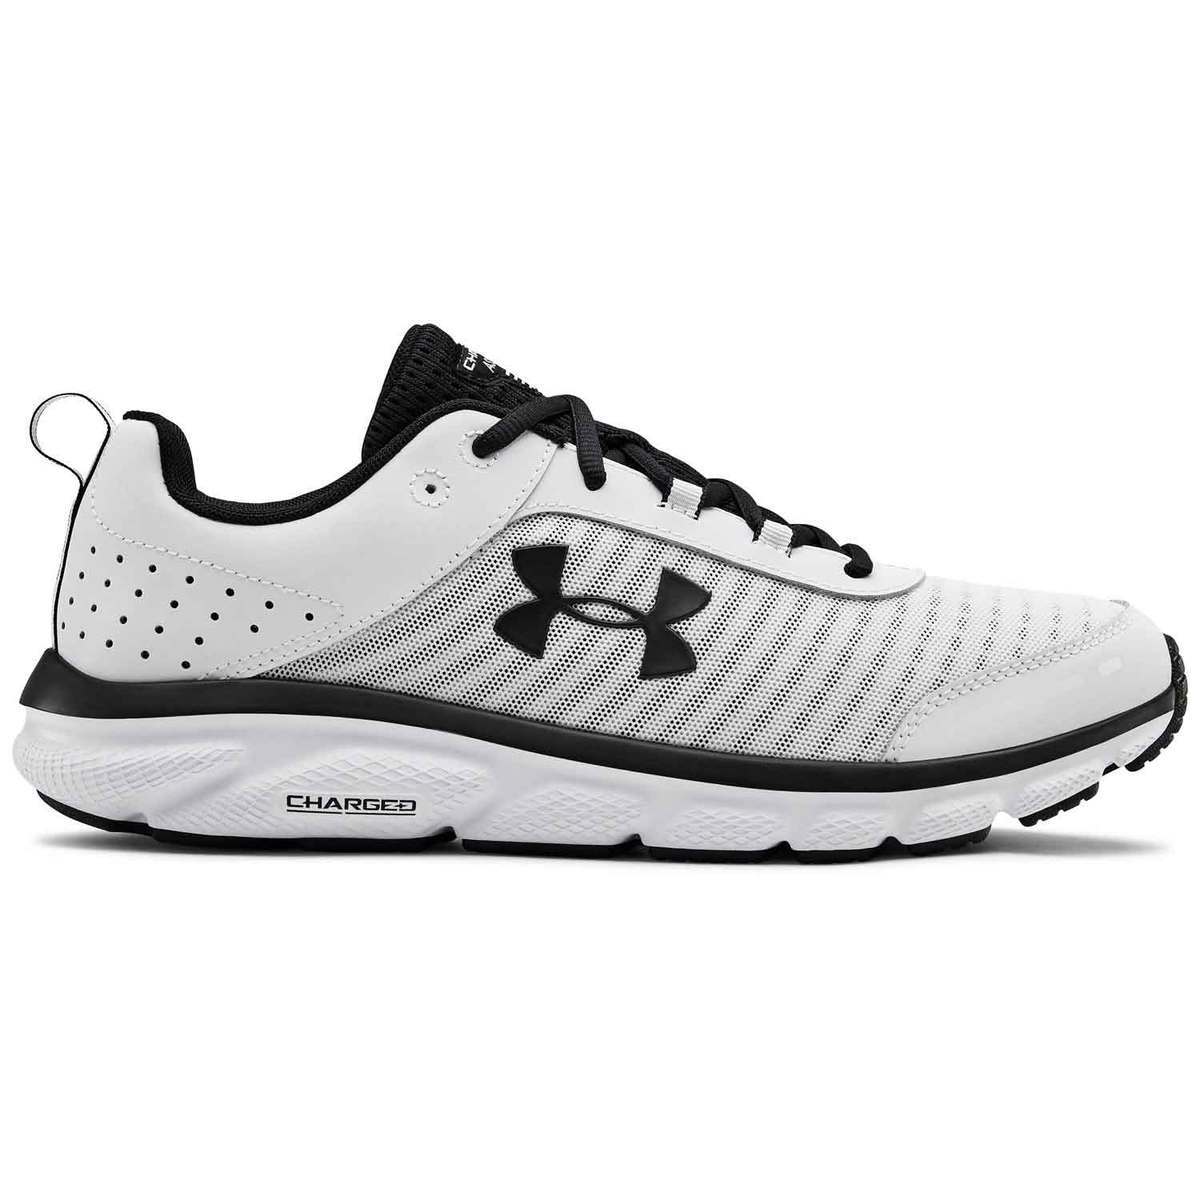 Under Armour Men's Charged Assert 8 Running Shoes - White - Size 10